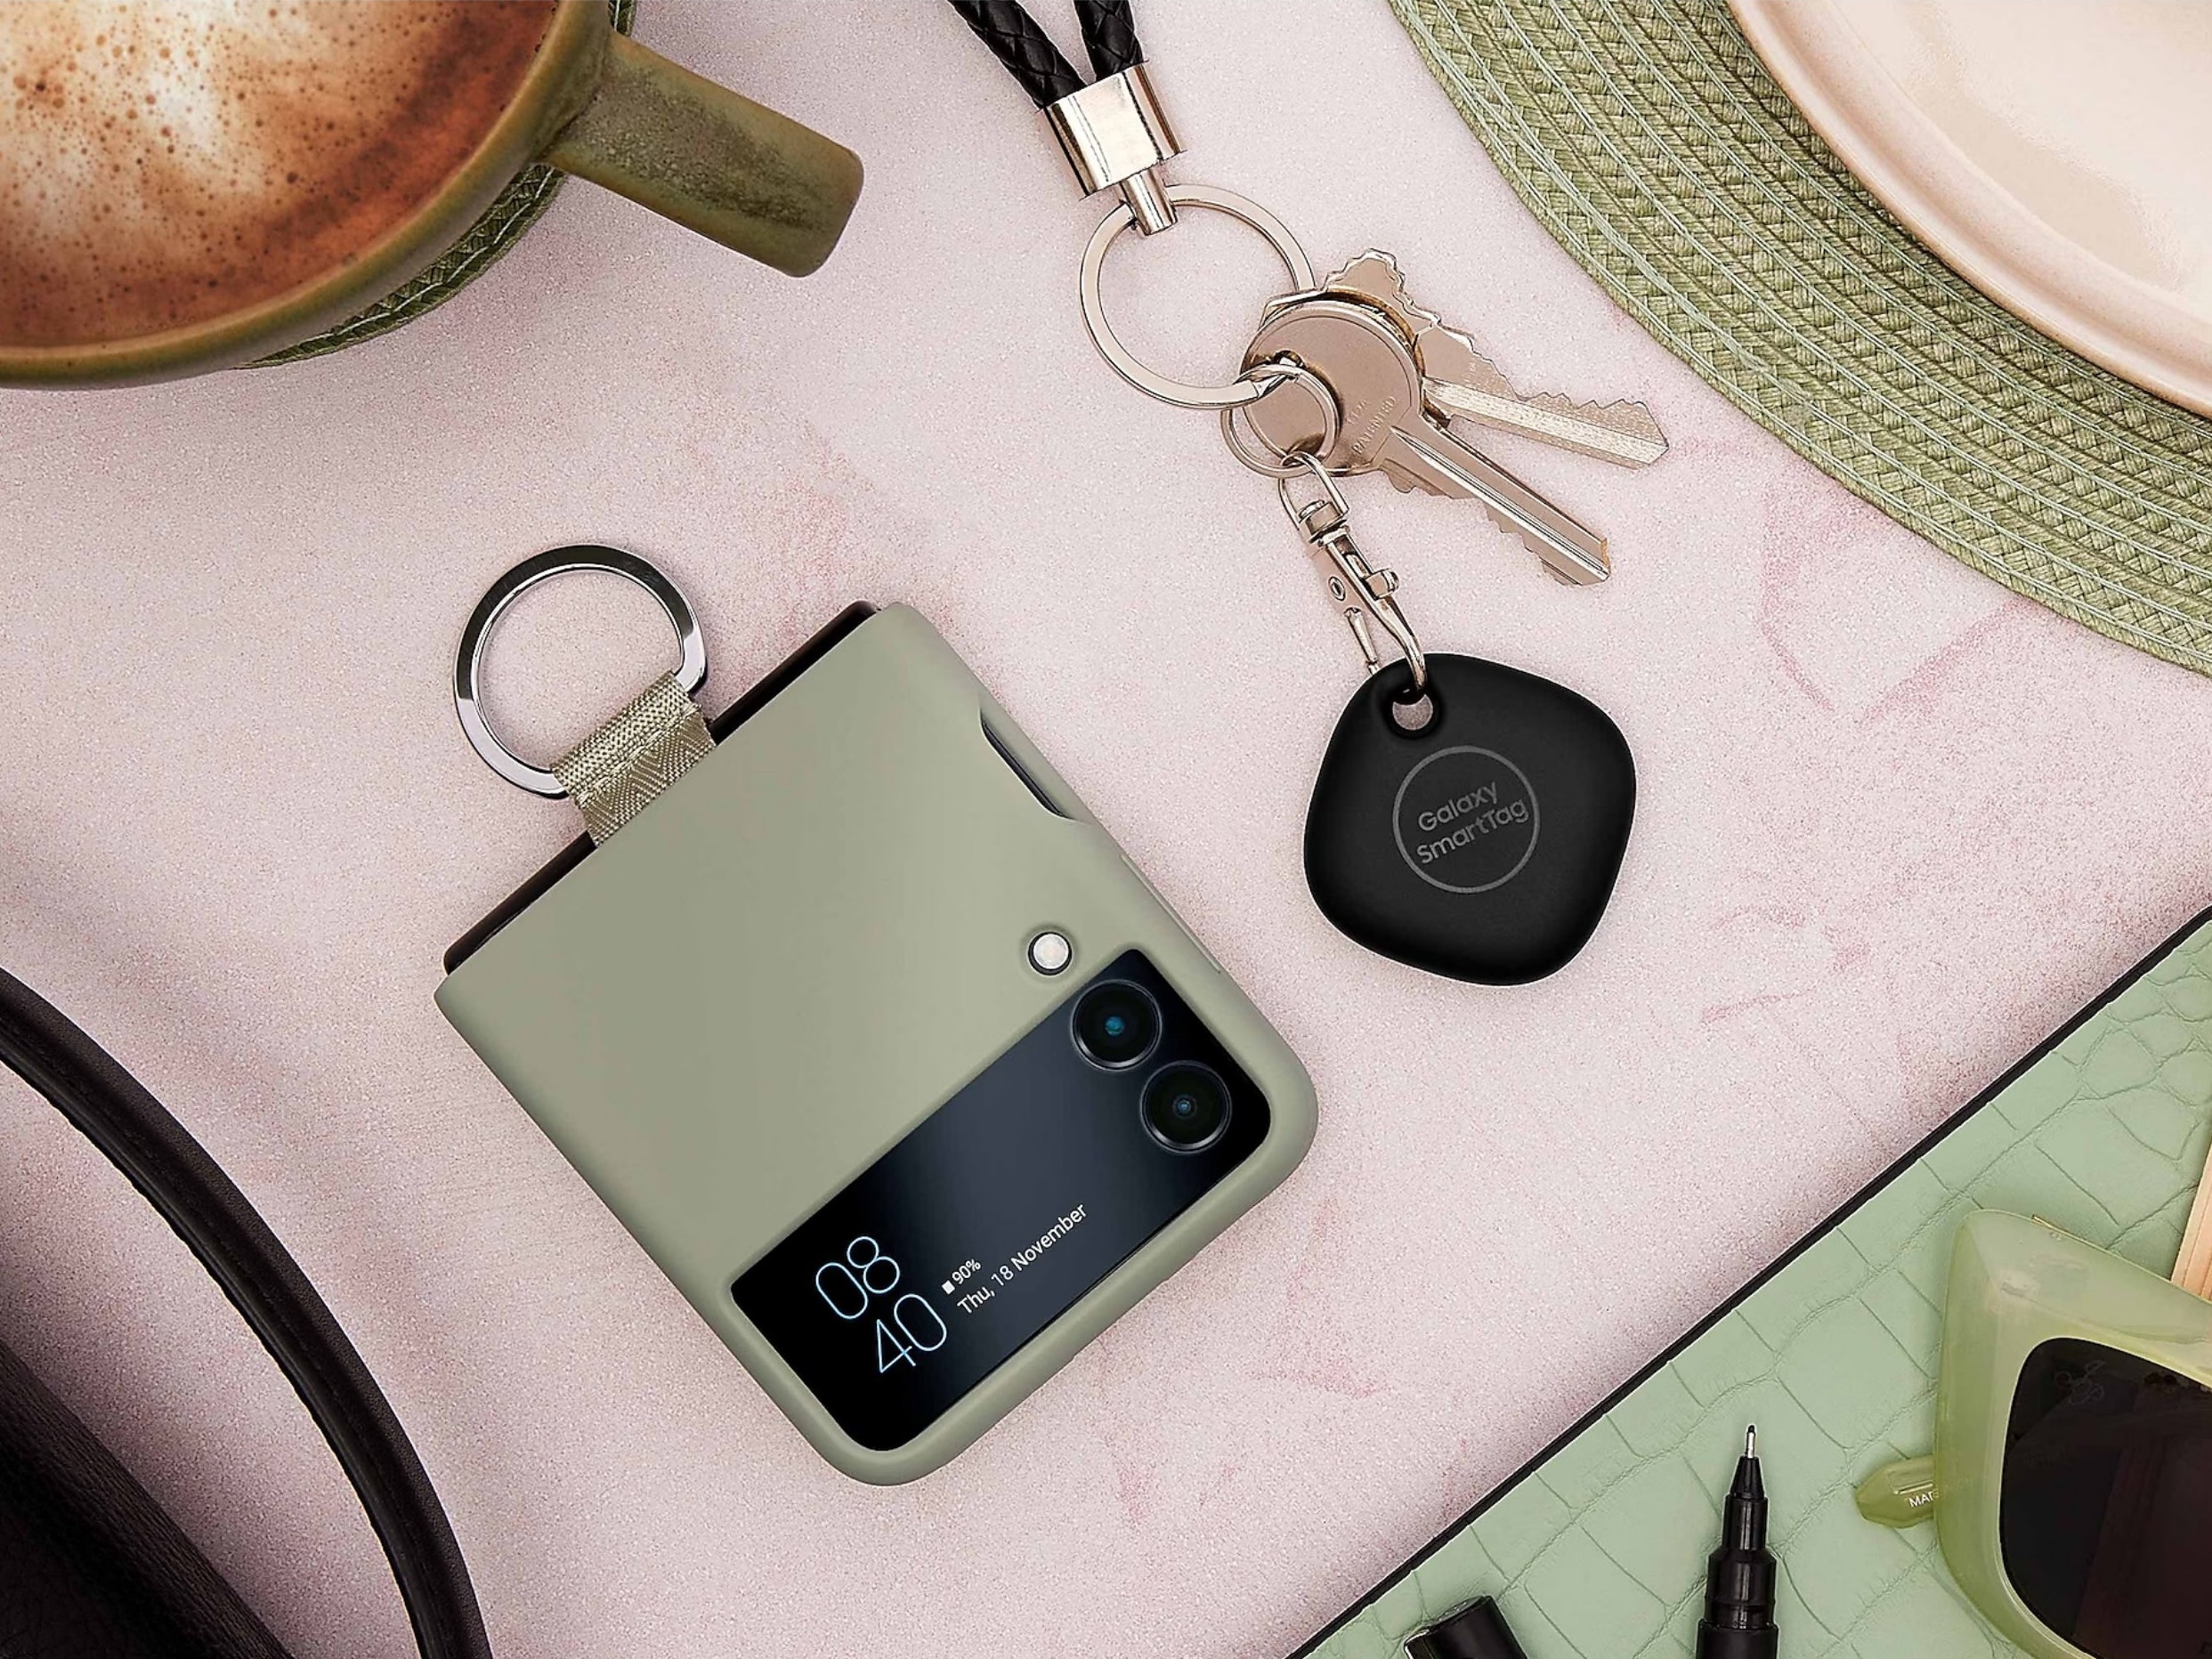 Use the Samsung Galaxy SmartTag and SmartTag+